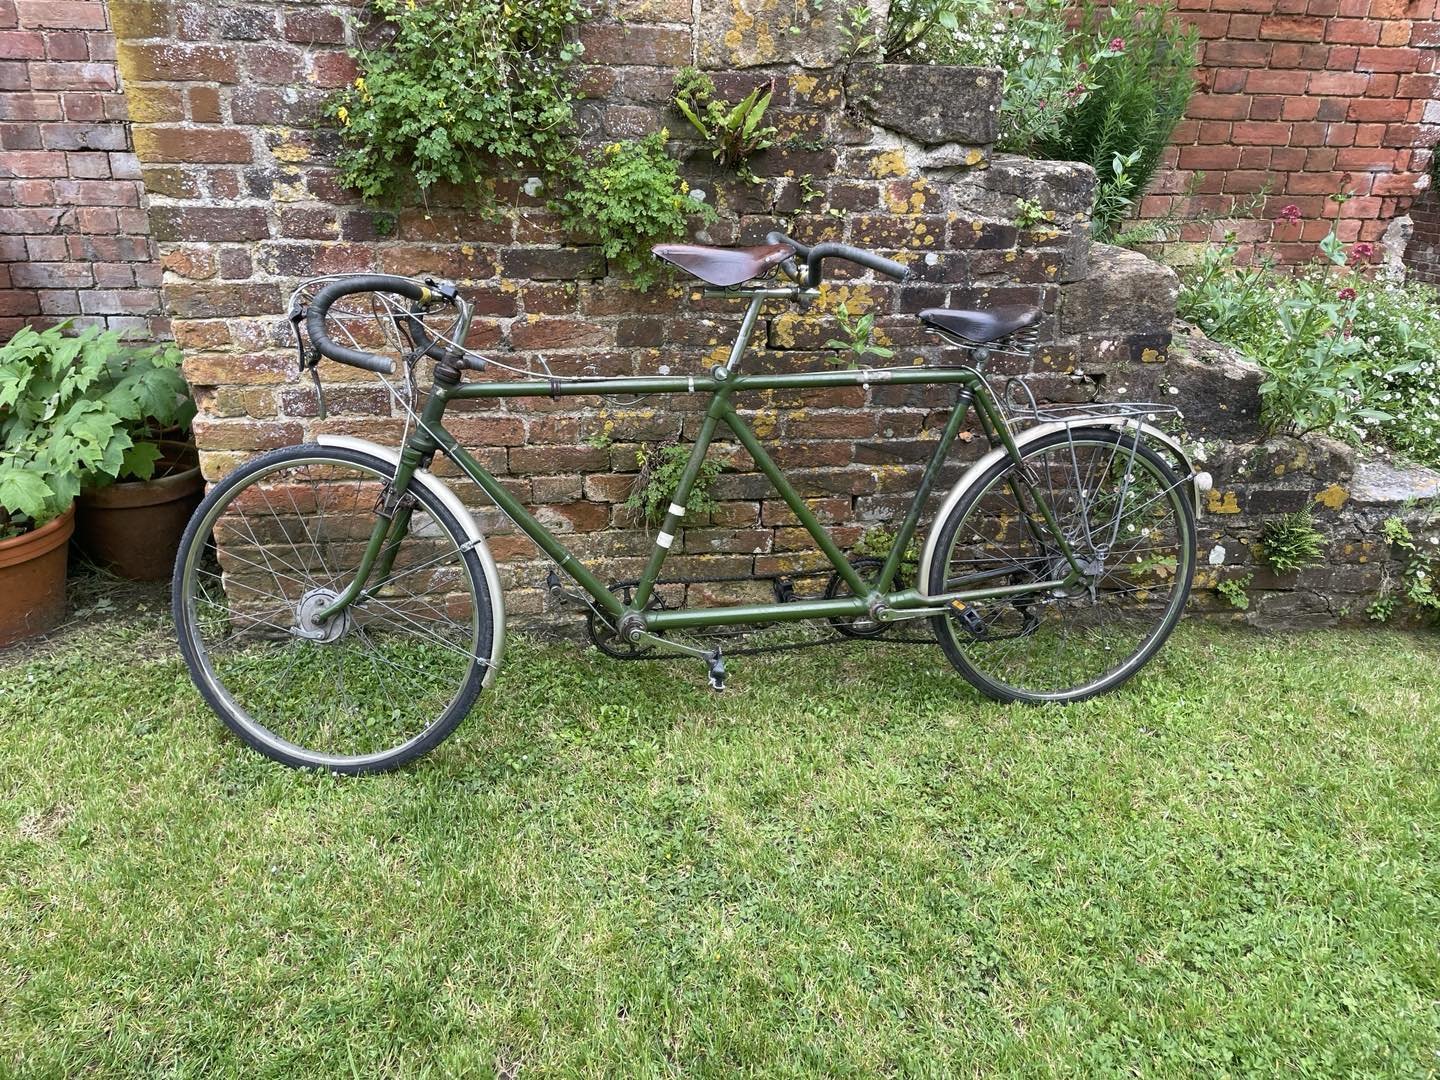 A bicycle made for two... the song that haunted my childhood has come to life. #tandem #daisydaisy